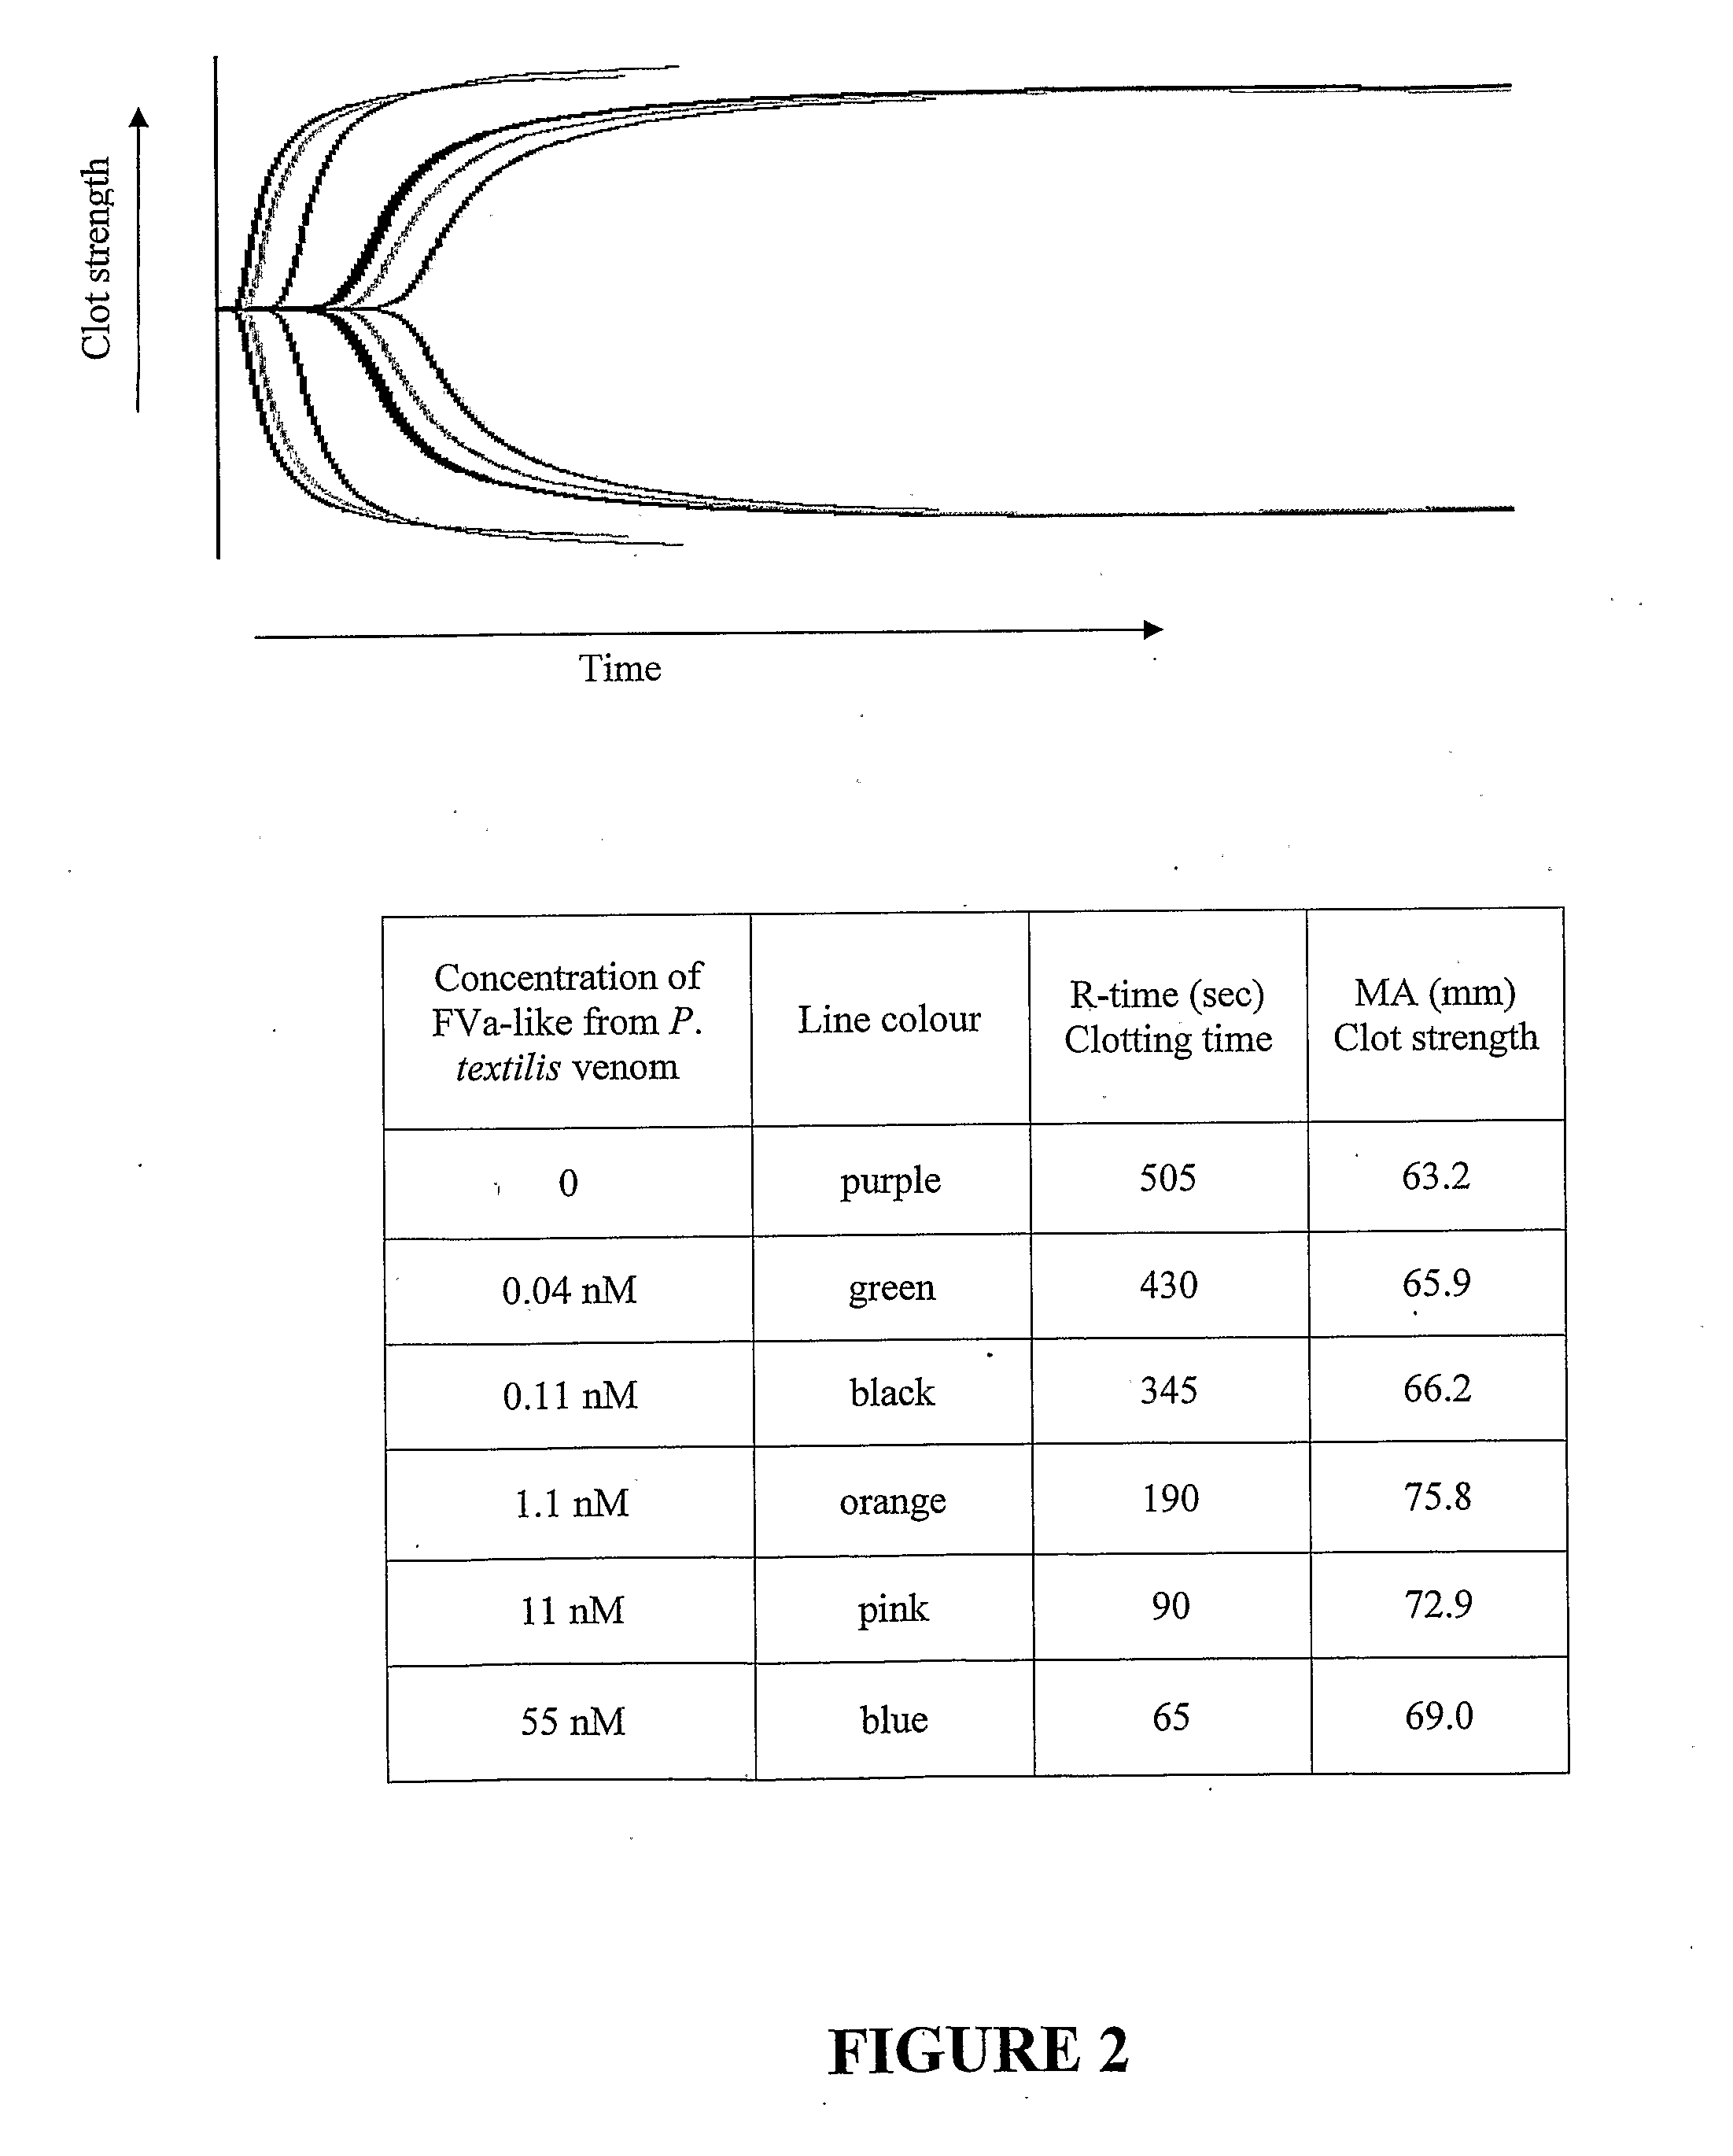 Haemostasis-modulating compositions and uses therefor